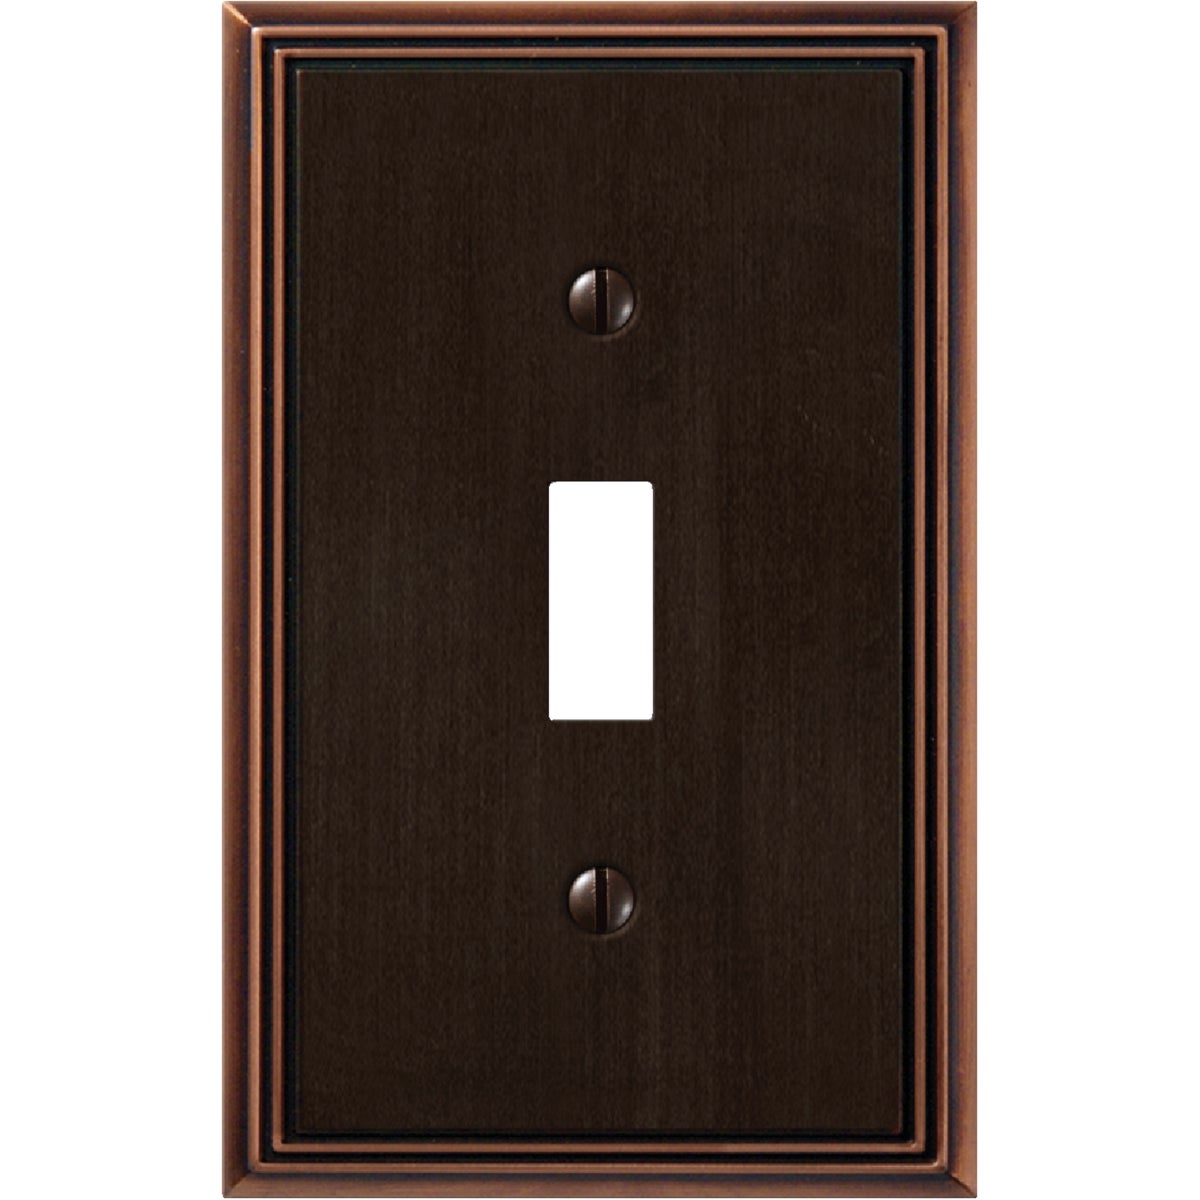 Amerelle Metro Line Cast Metal Switch Wall Plate